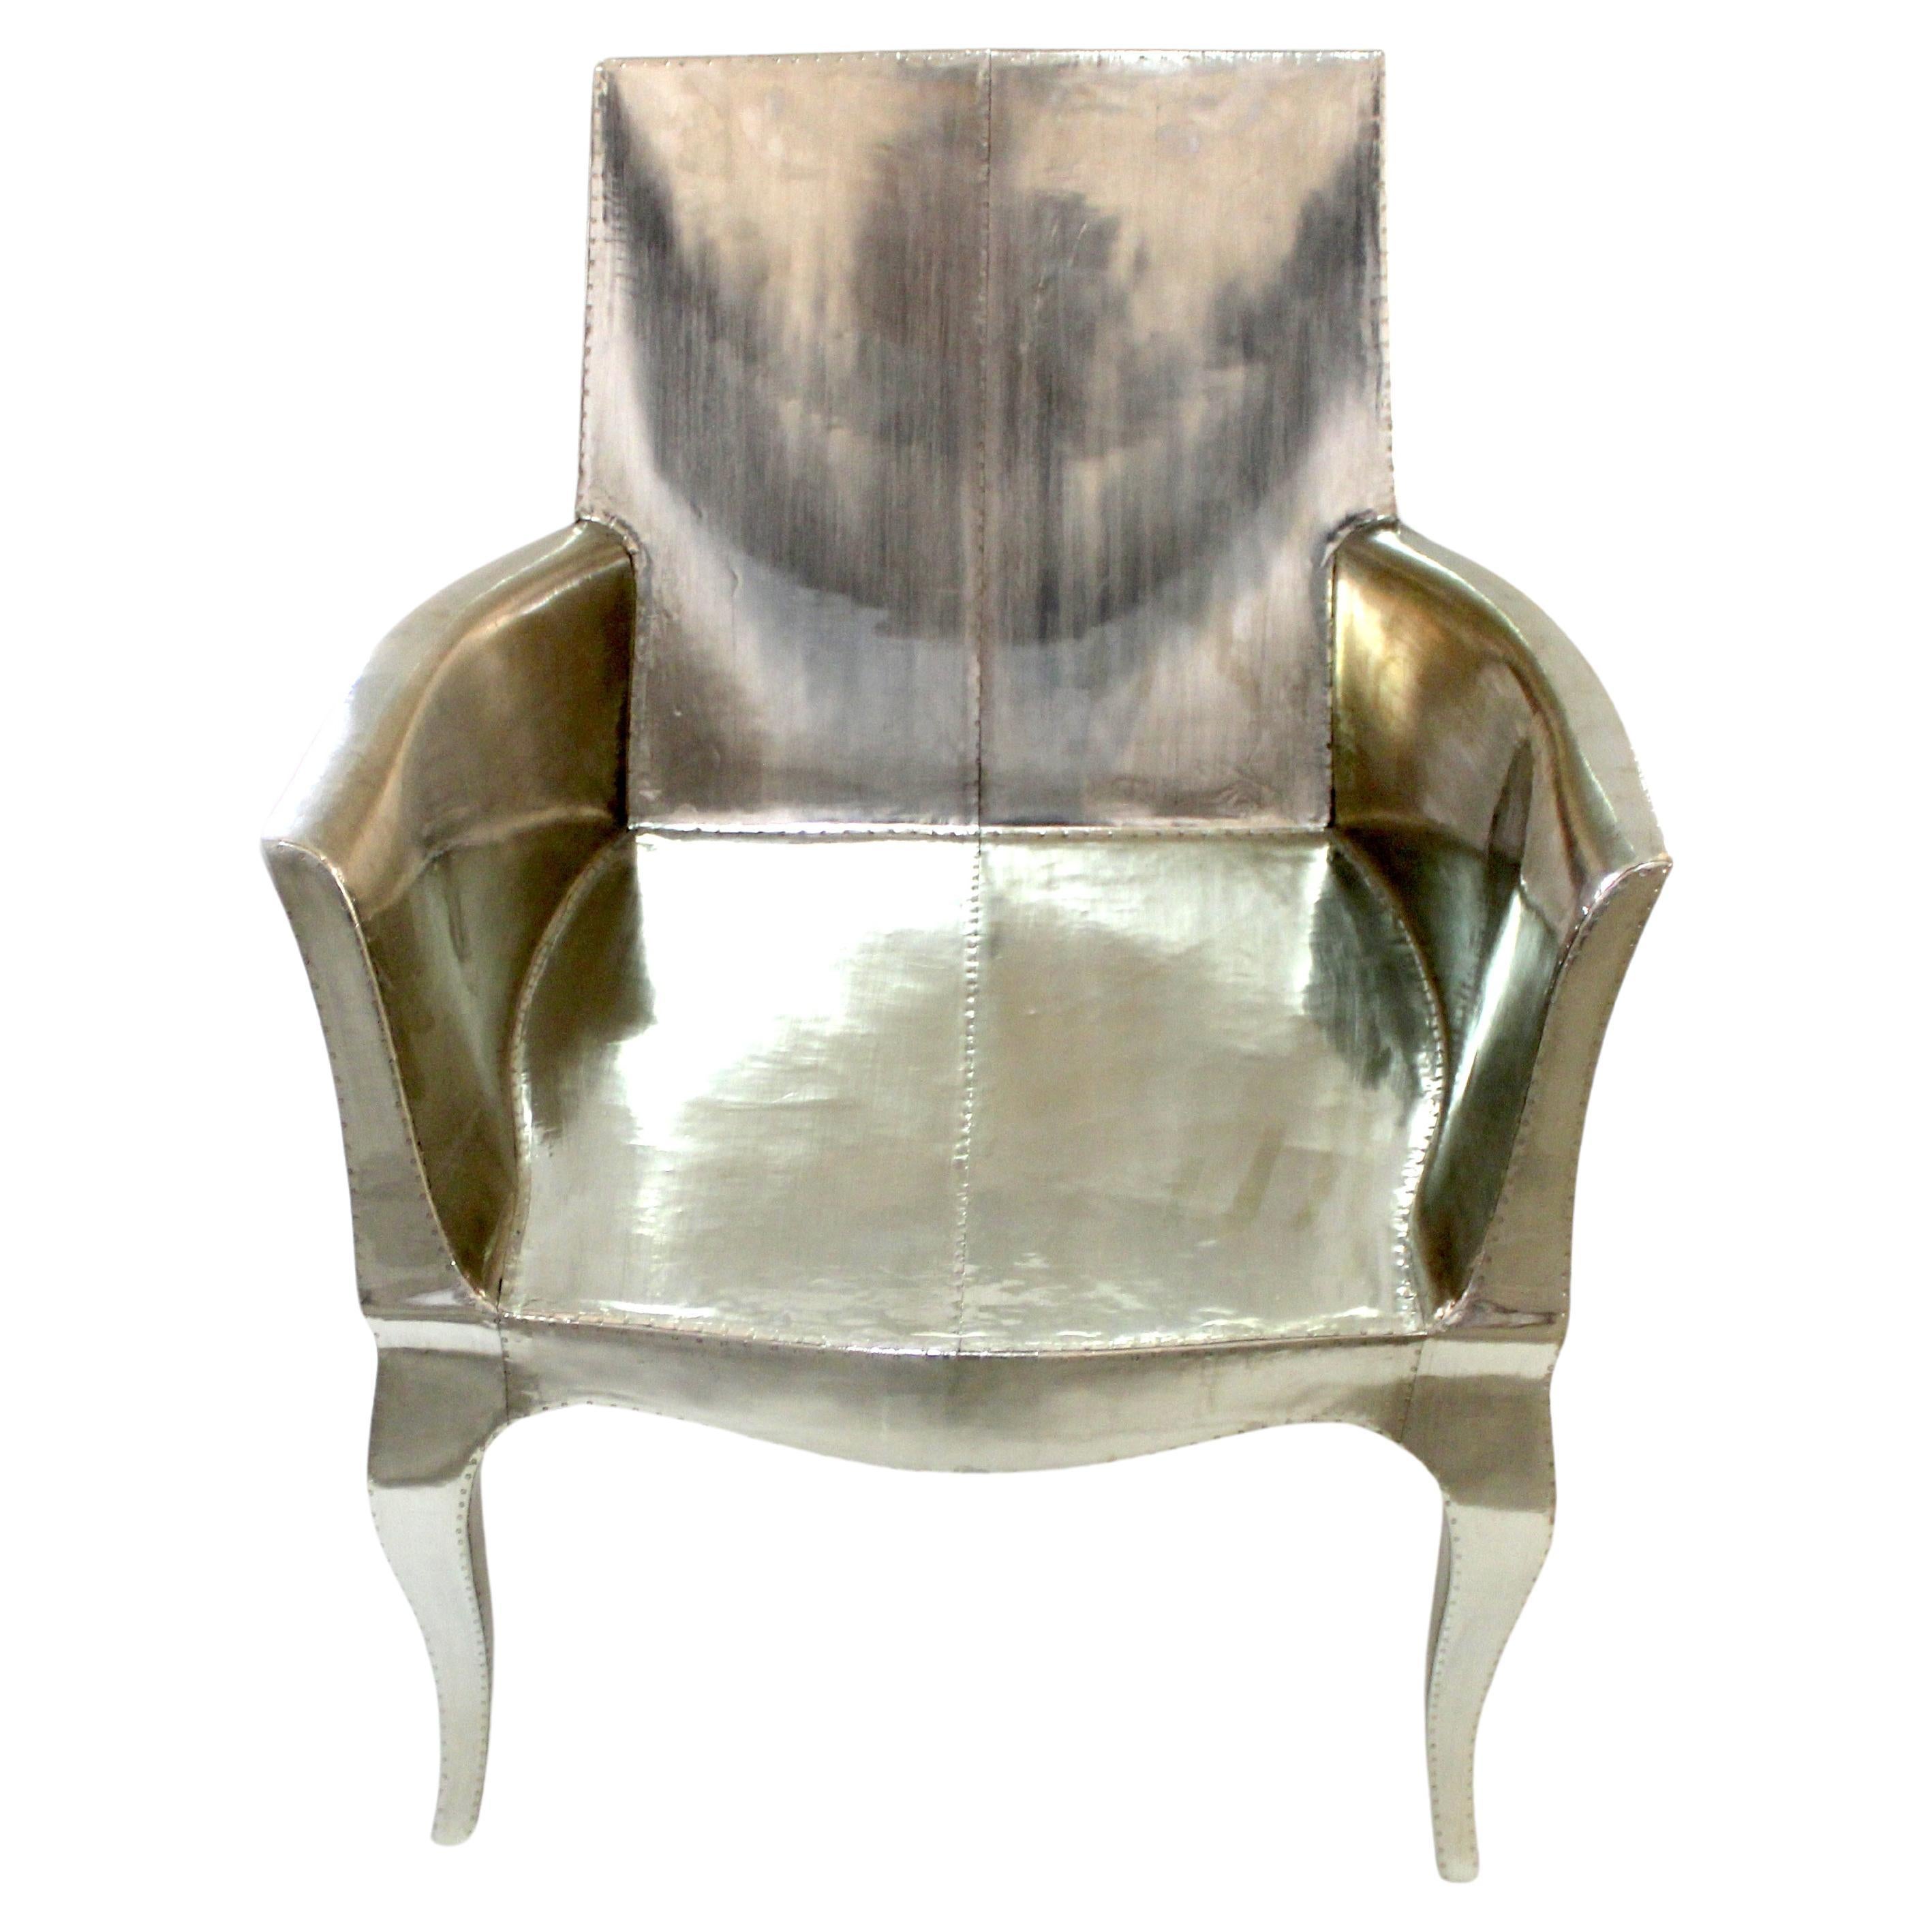 Art Nouveau Chairs in Smooth White Bronze by Paul Mathieu for S. Odegard For Sale